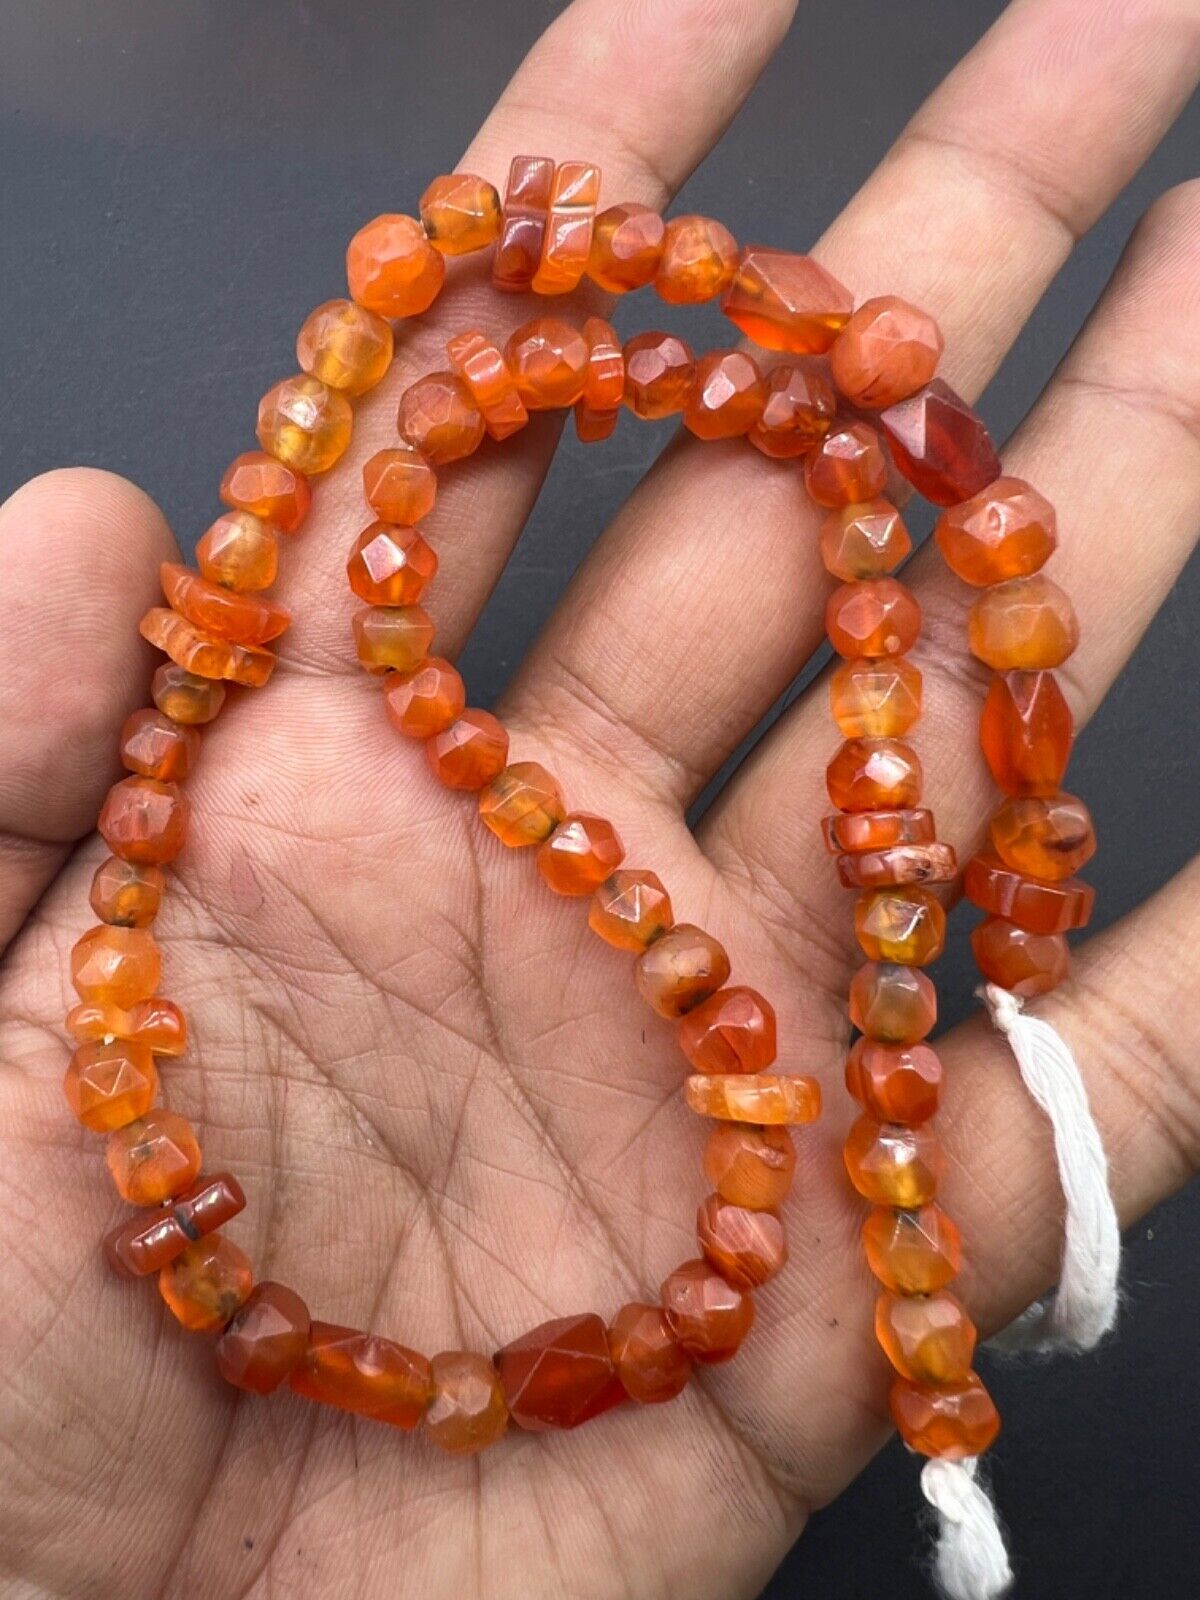 Top Quality Natural Diamond Cut Ancient Old Carnelian Agate Rare Antique Sting